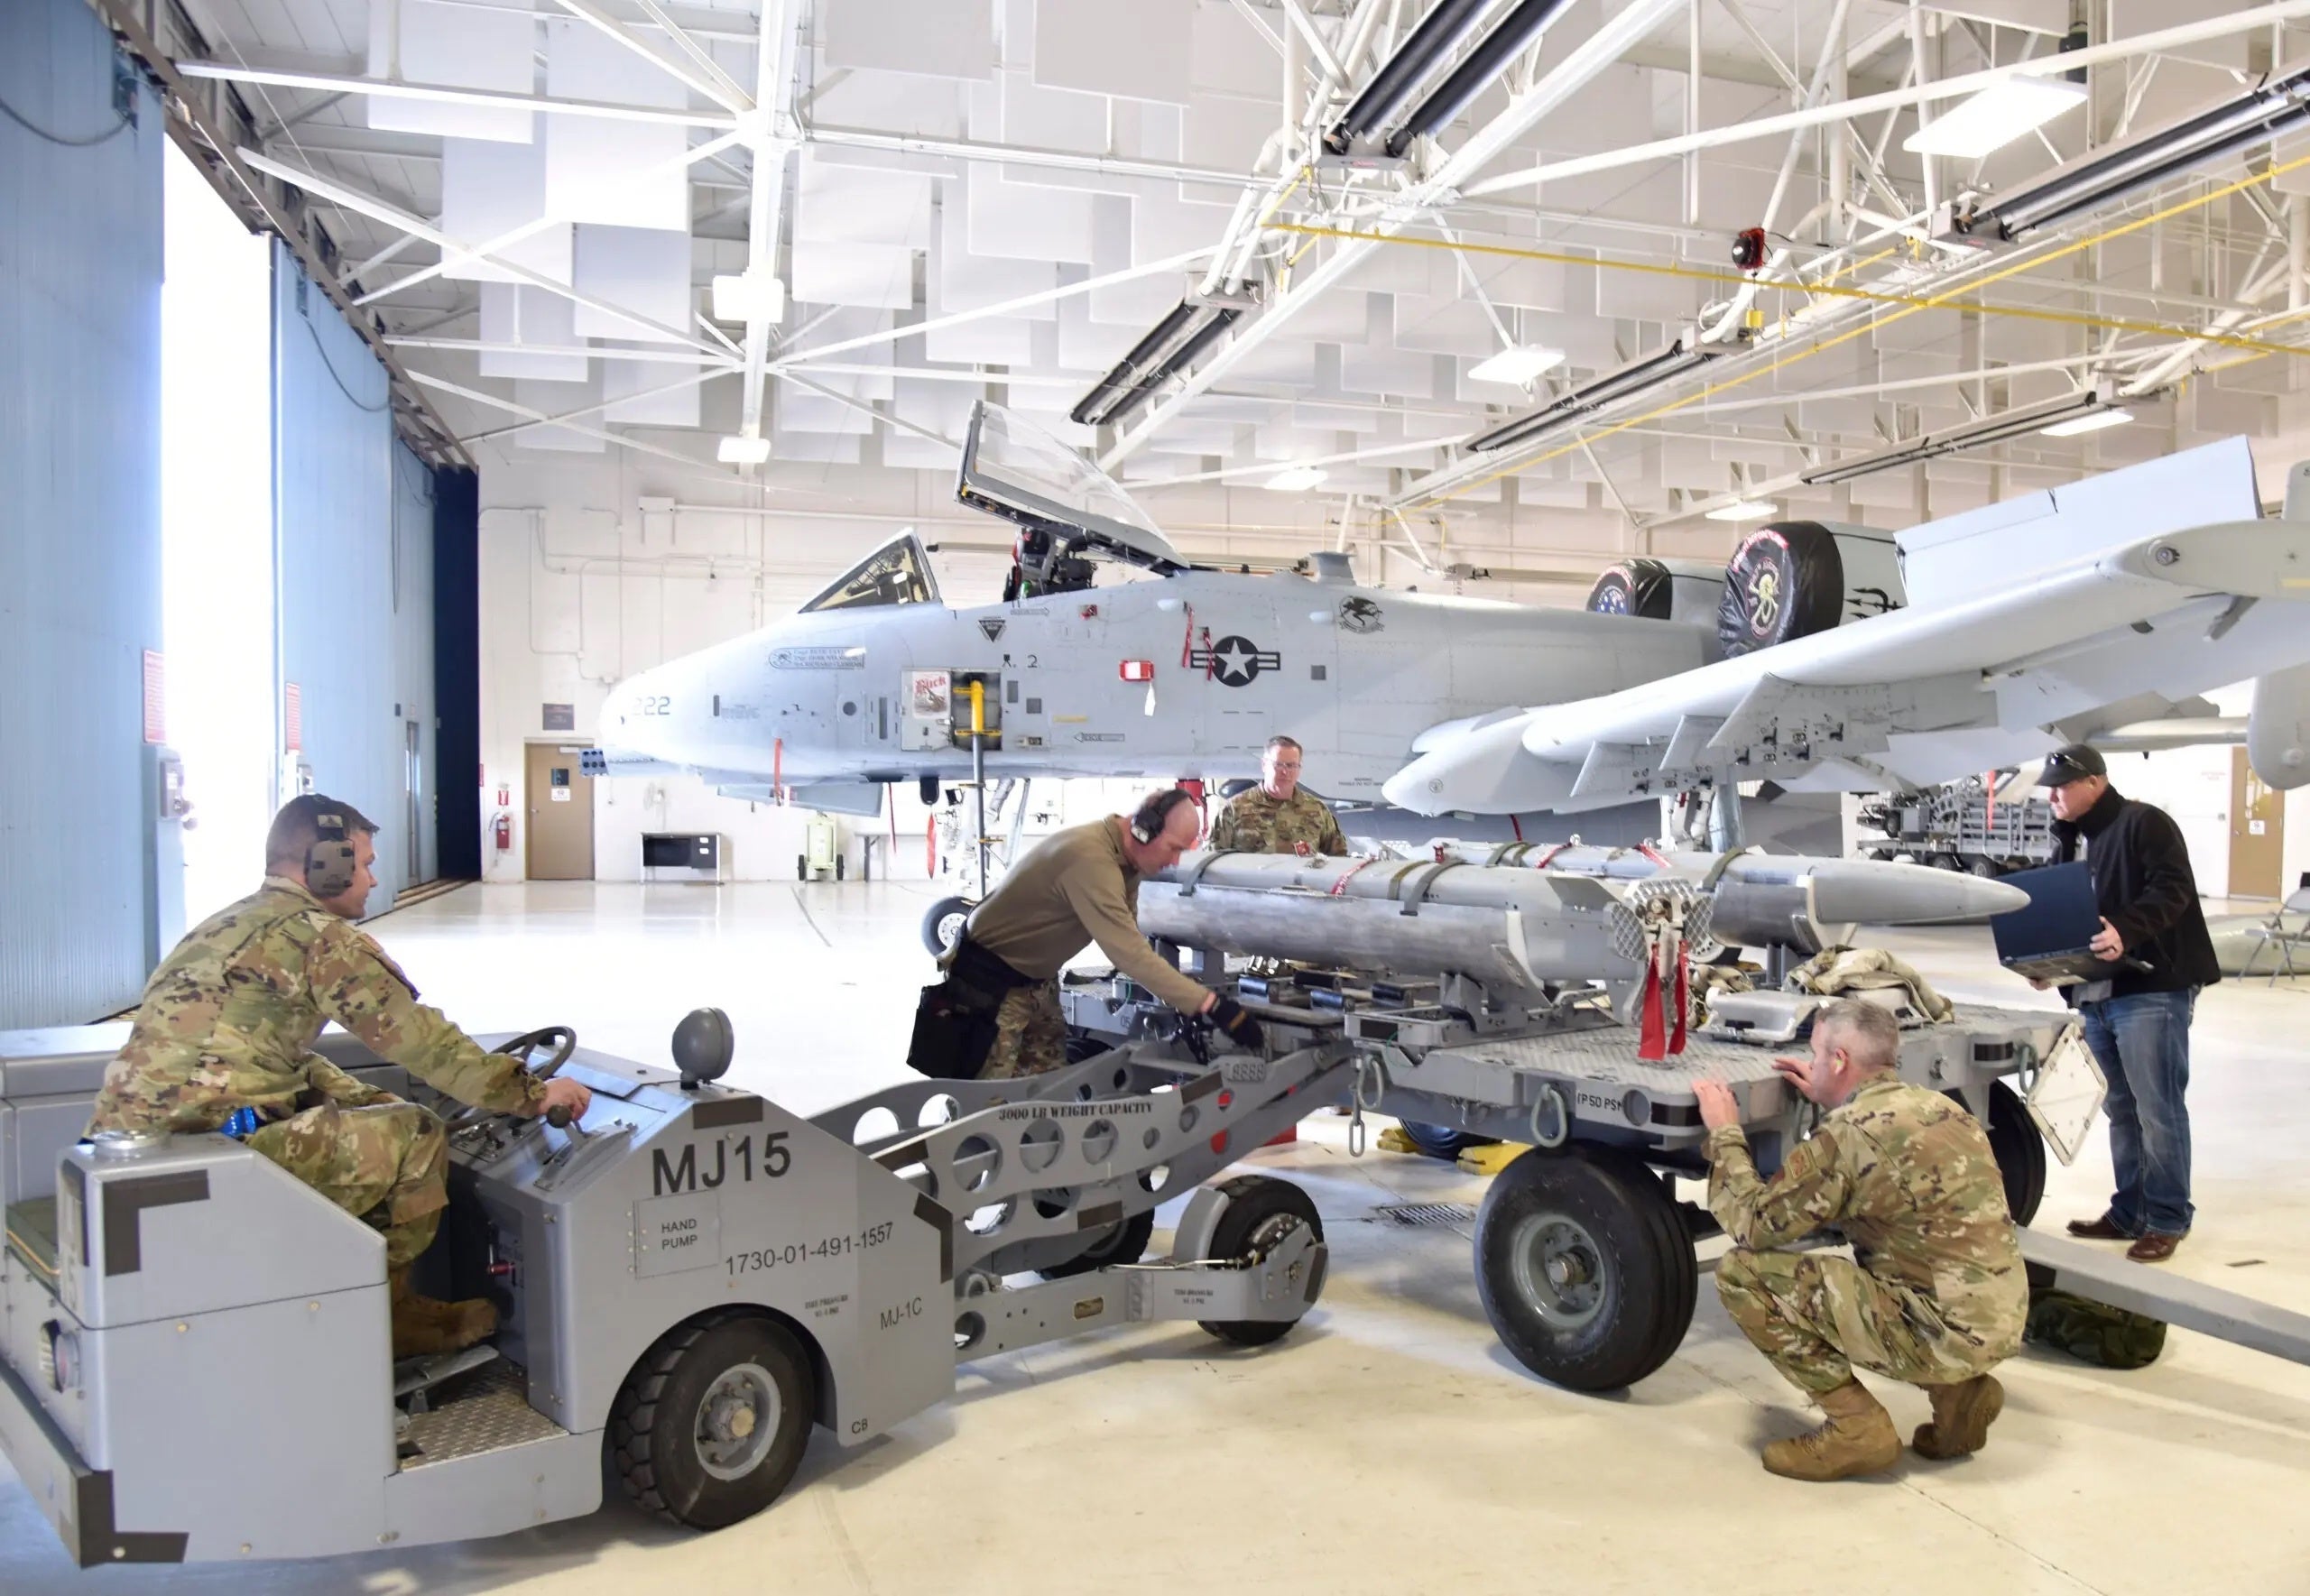 A-10 pilot explains how the Air Force can outfit the beloved ‘Warthog’ to take on China